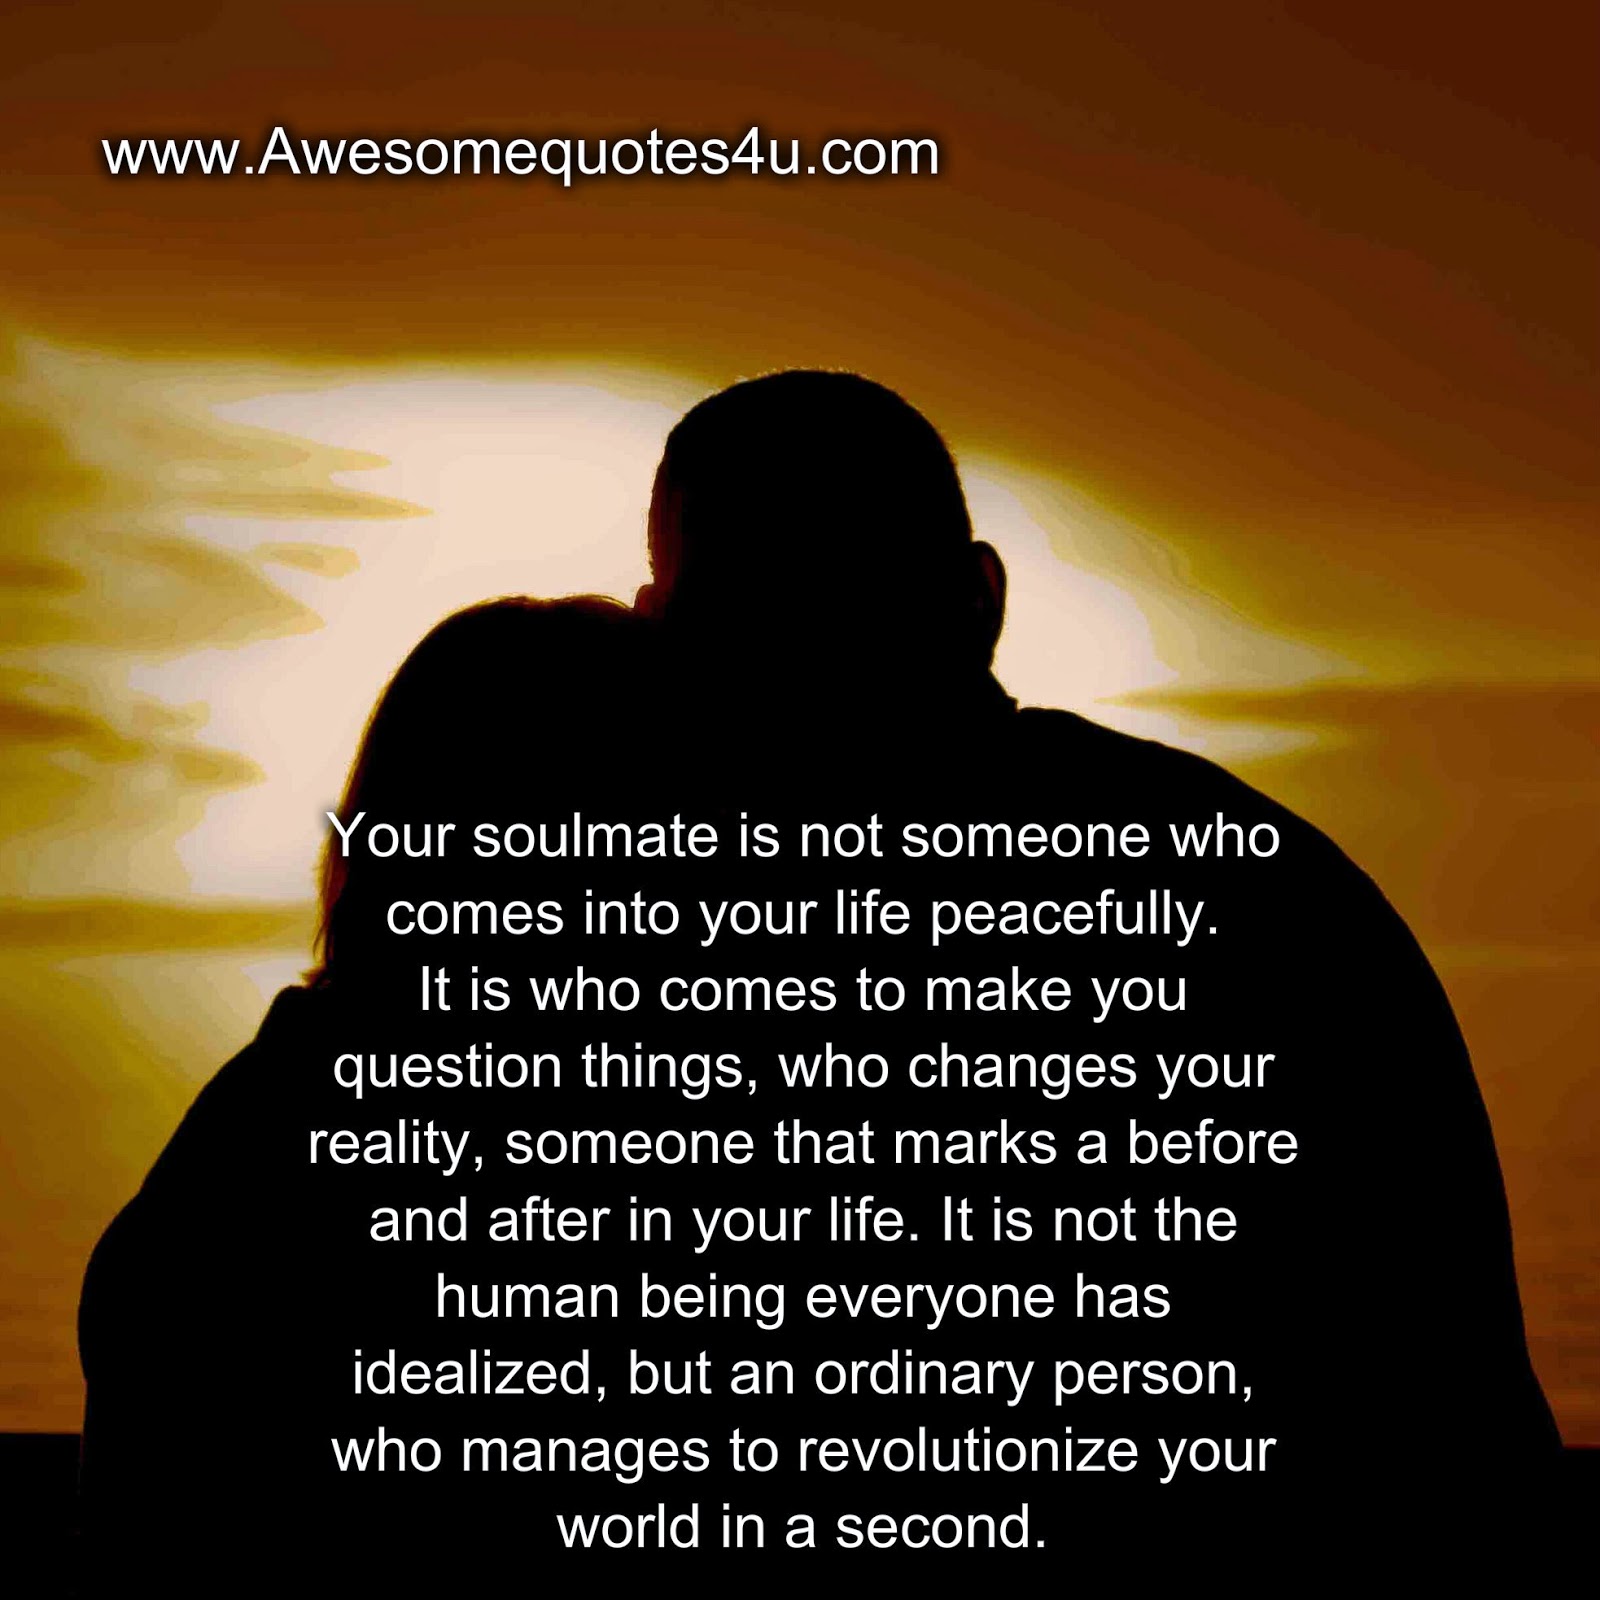 Awesome Quotes Your soulmate  is not someone who comes 